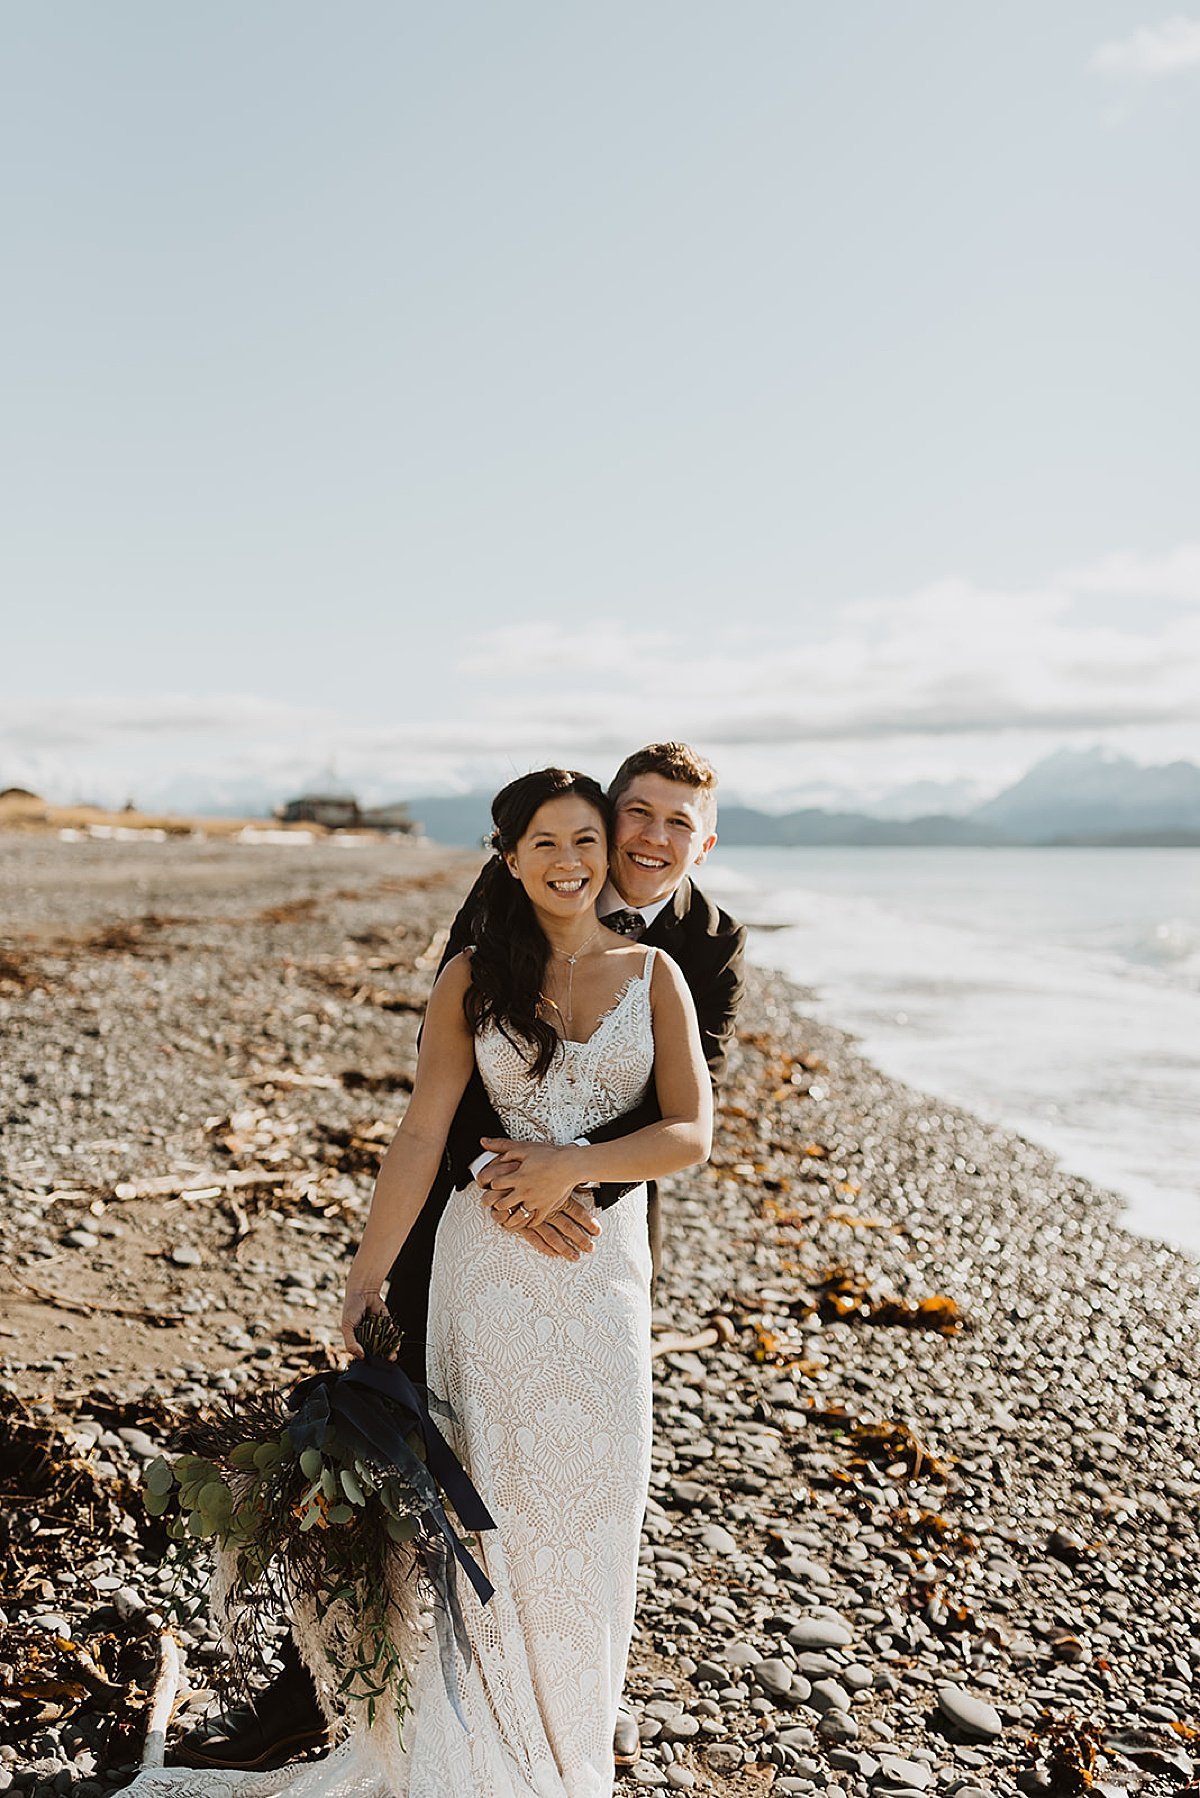  newlywed bride and groom pose on rocky beach after wedding ceremony shot by Theresa McDonald Photography 